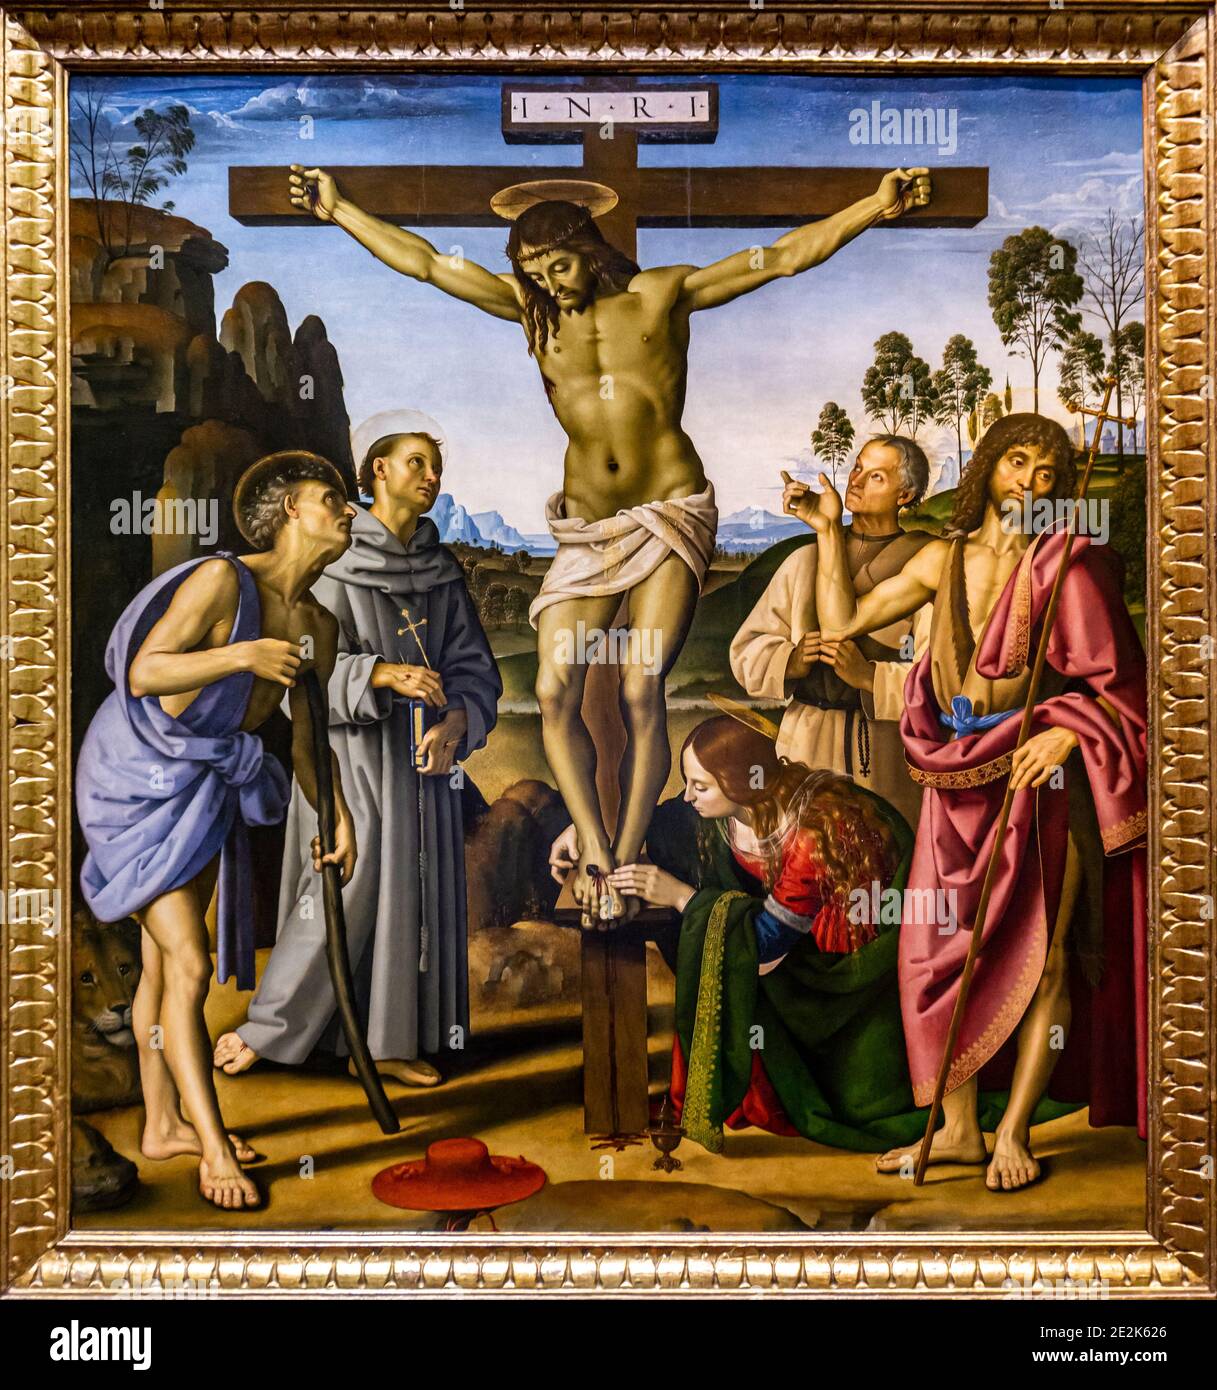 Painting Crucifixion by Perugino and Signorelli from 1483-1495 at Uffizi Gallery in Florence, Italy. Stock Photo